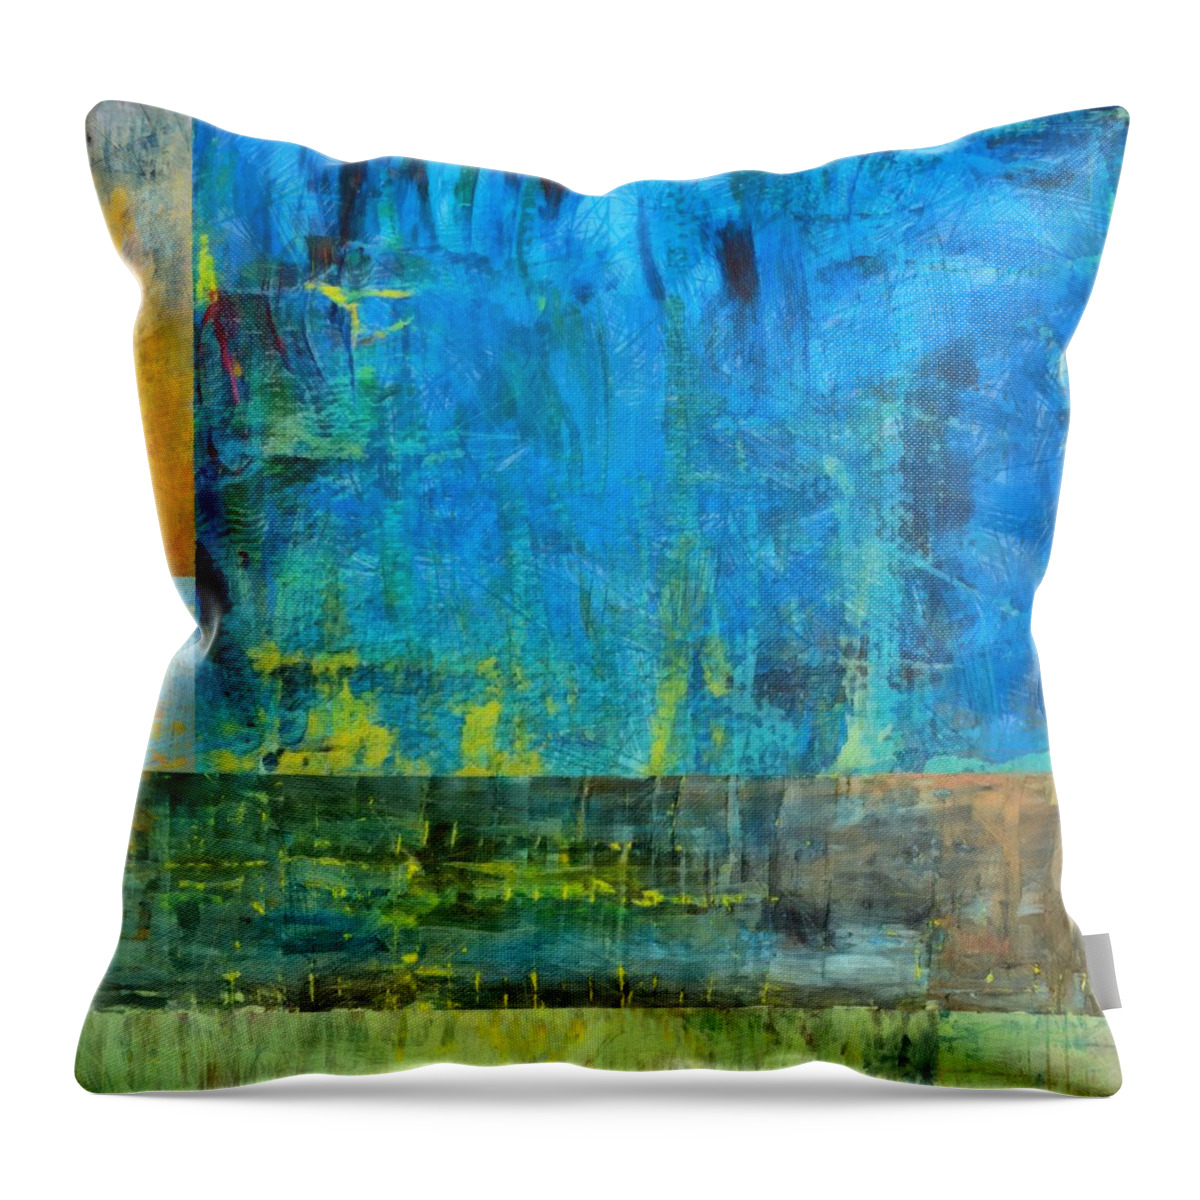 Blue Throw Pillow featuring the painting Essence of Blue by Michelle Calkins